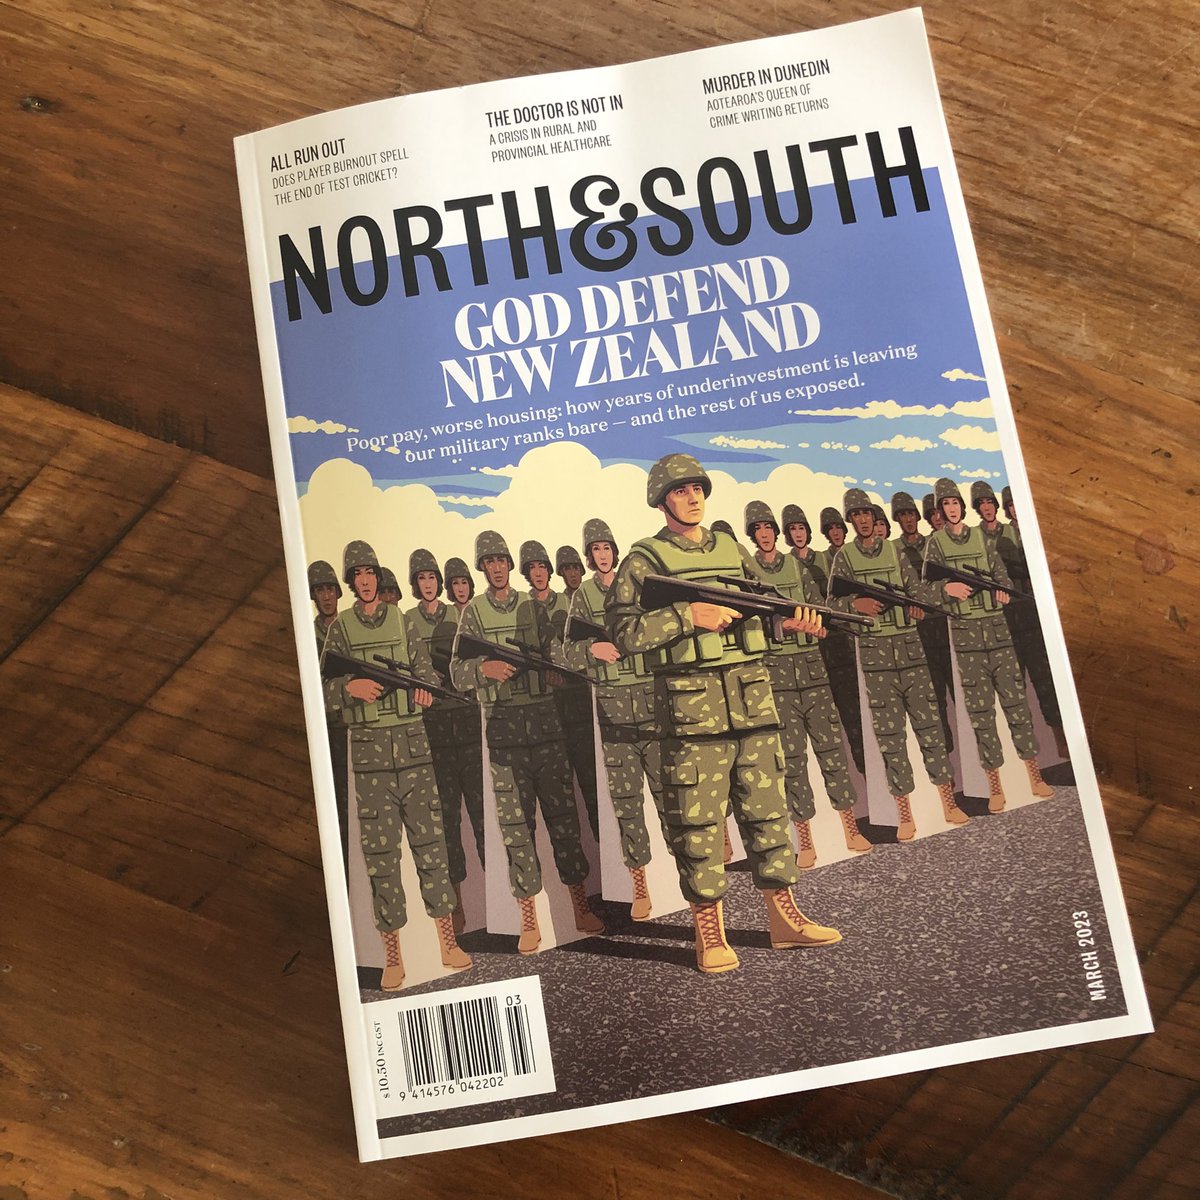 Delighted to be featured in the March issue of North & South magazine. Great article by @tmclean_otago